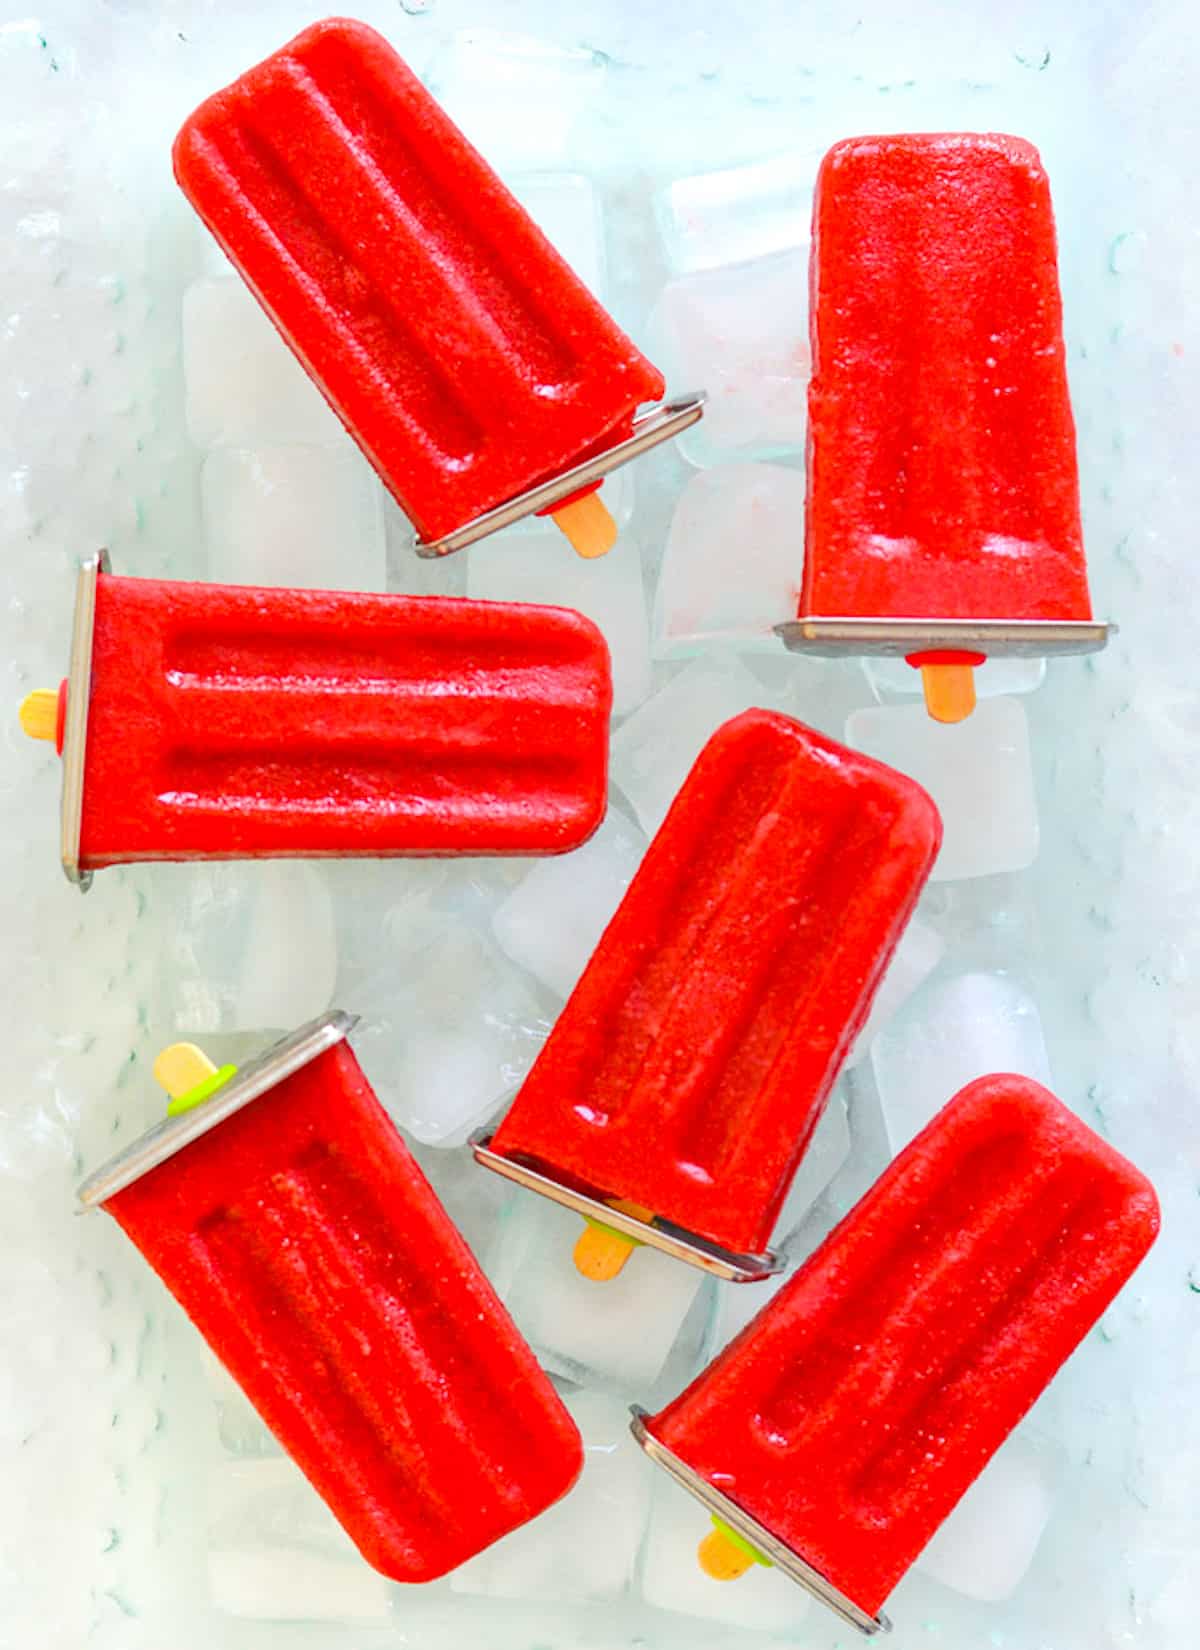 strawberry popsicles on ice